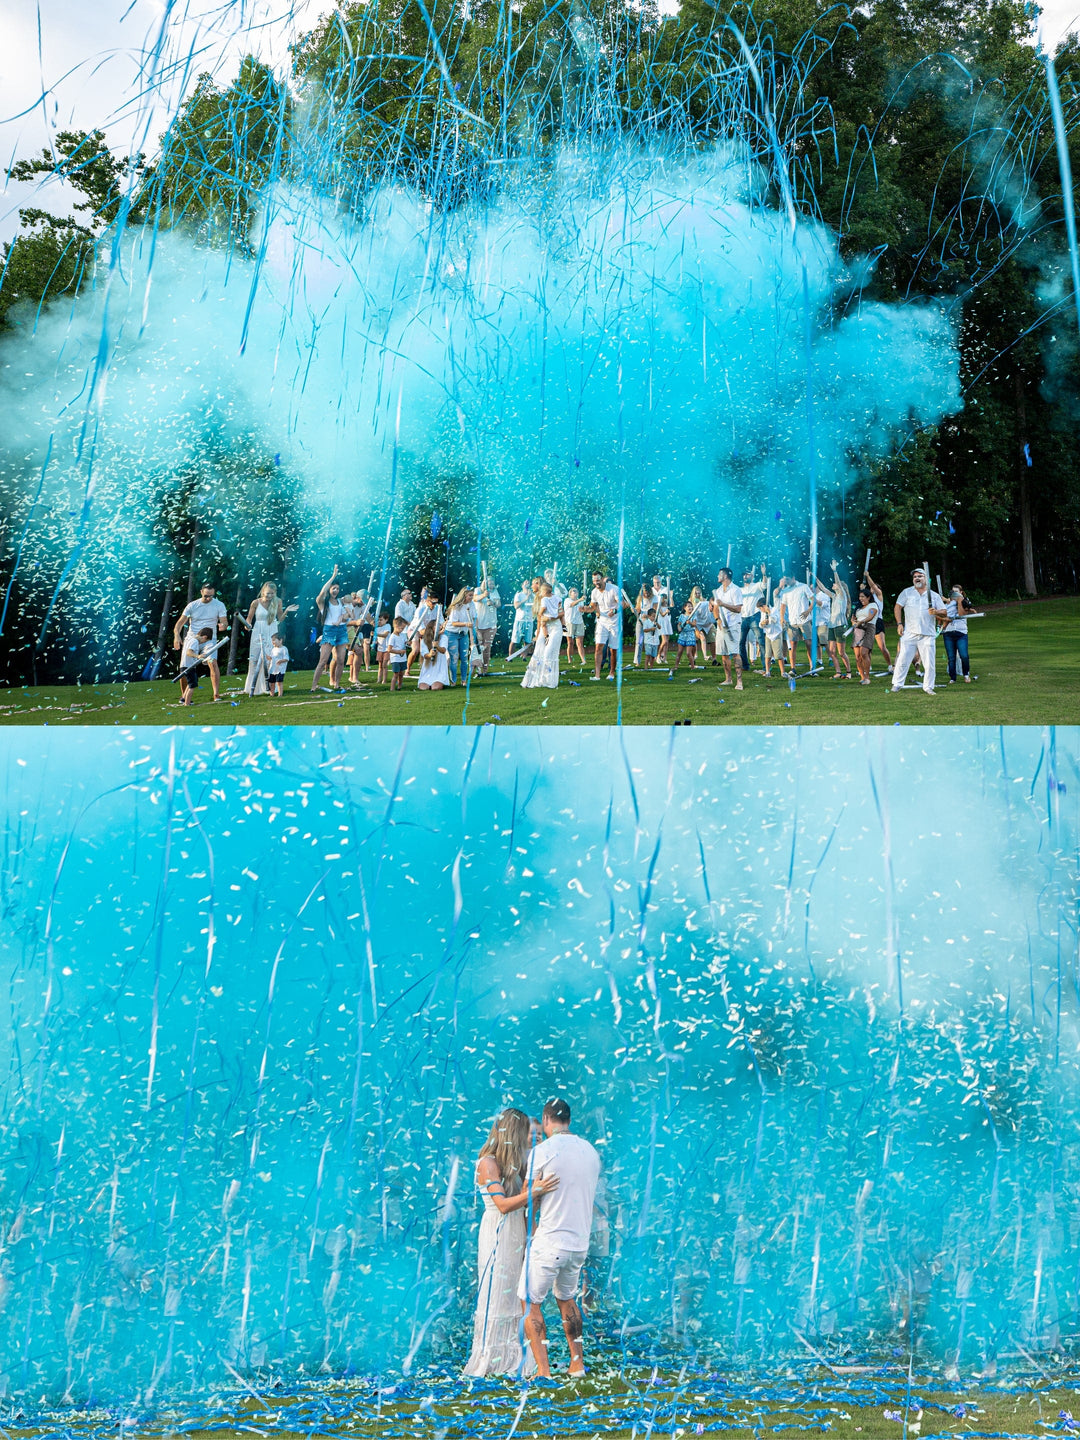 Confetti + Powder + Streamers Gender Reveal Cannons – POOF THERE IT IS!